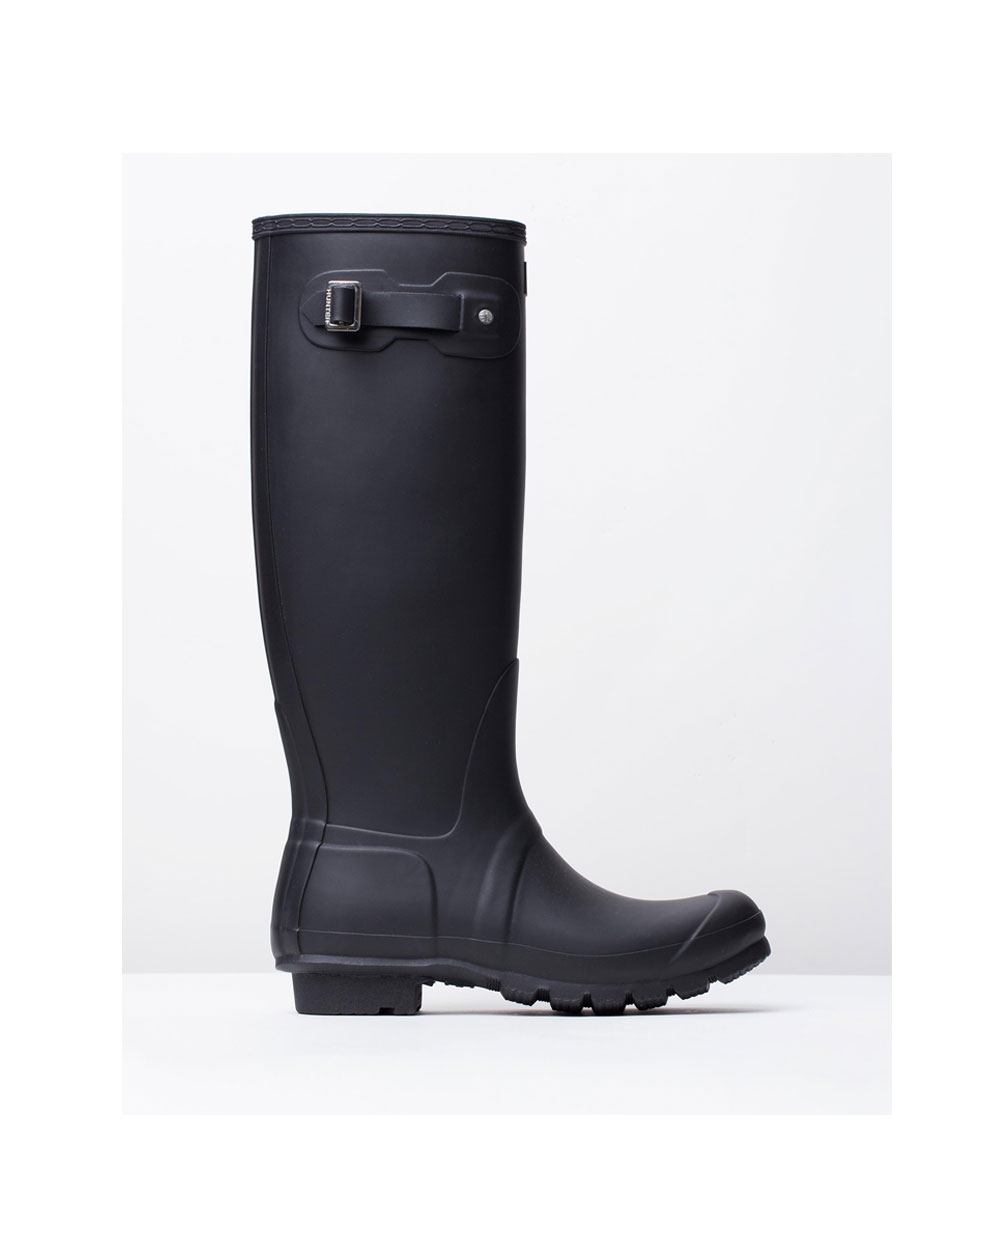 Hunter boots from The Iconic